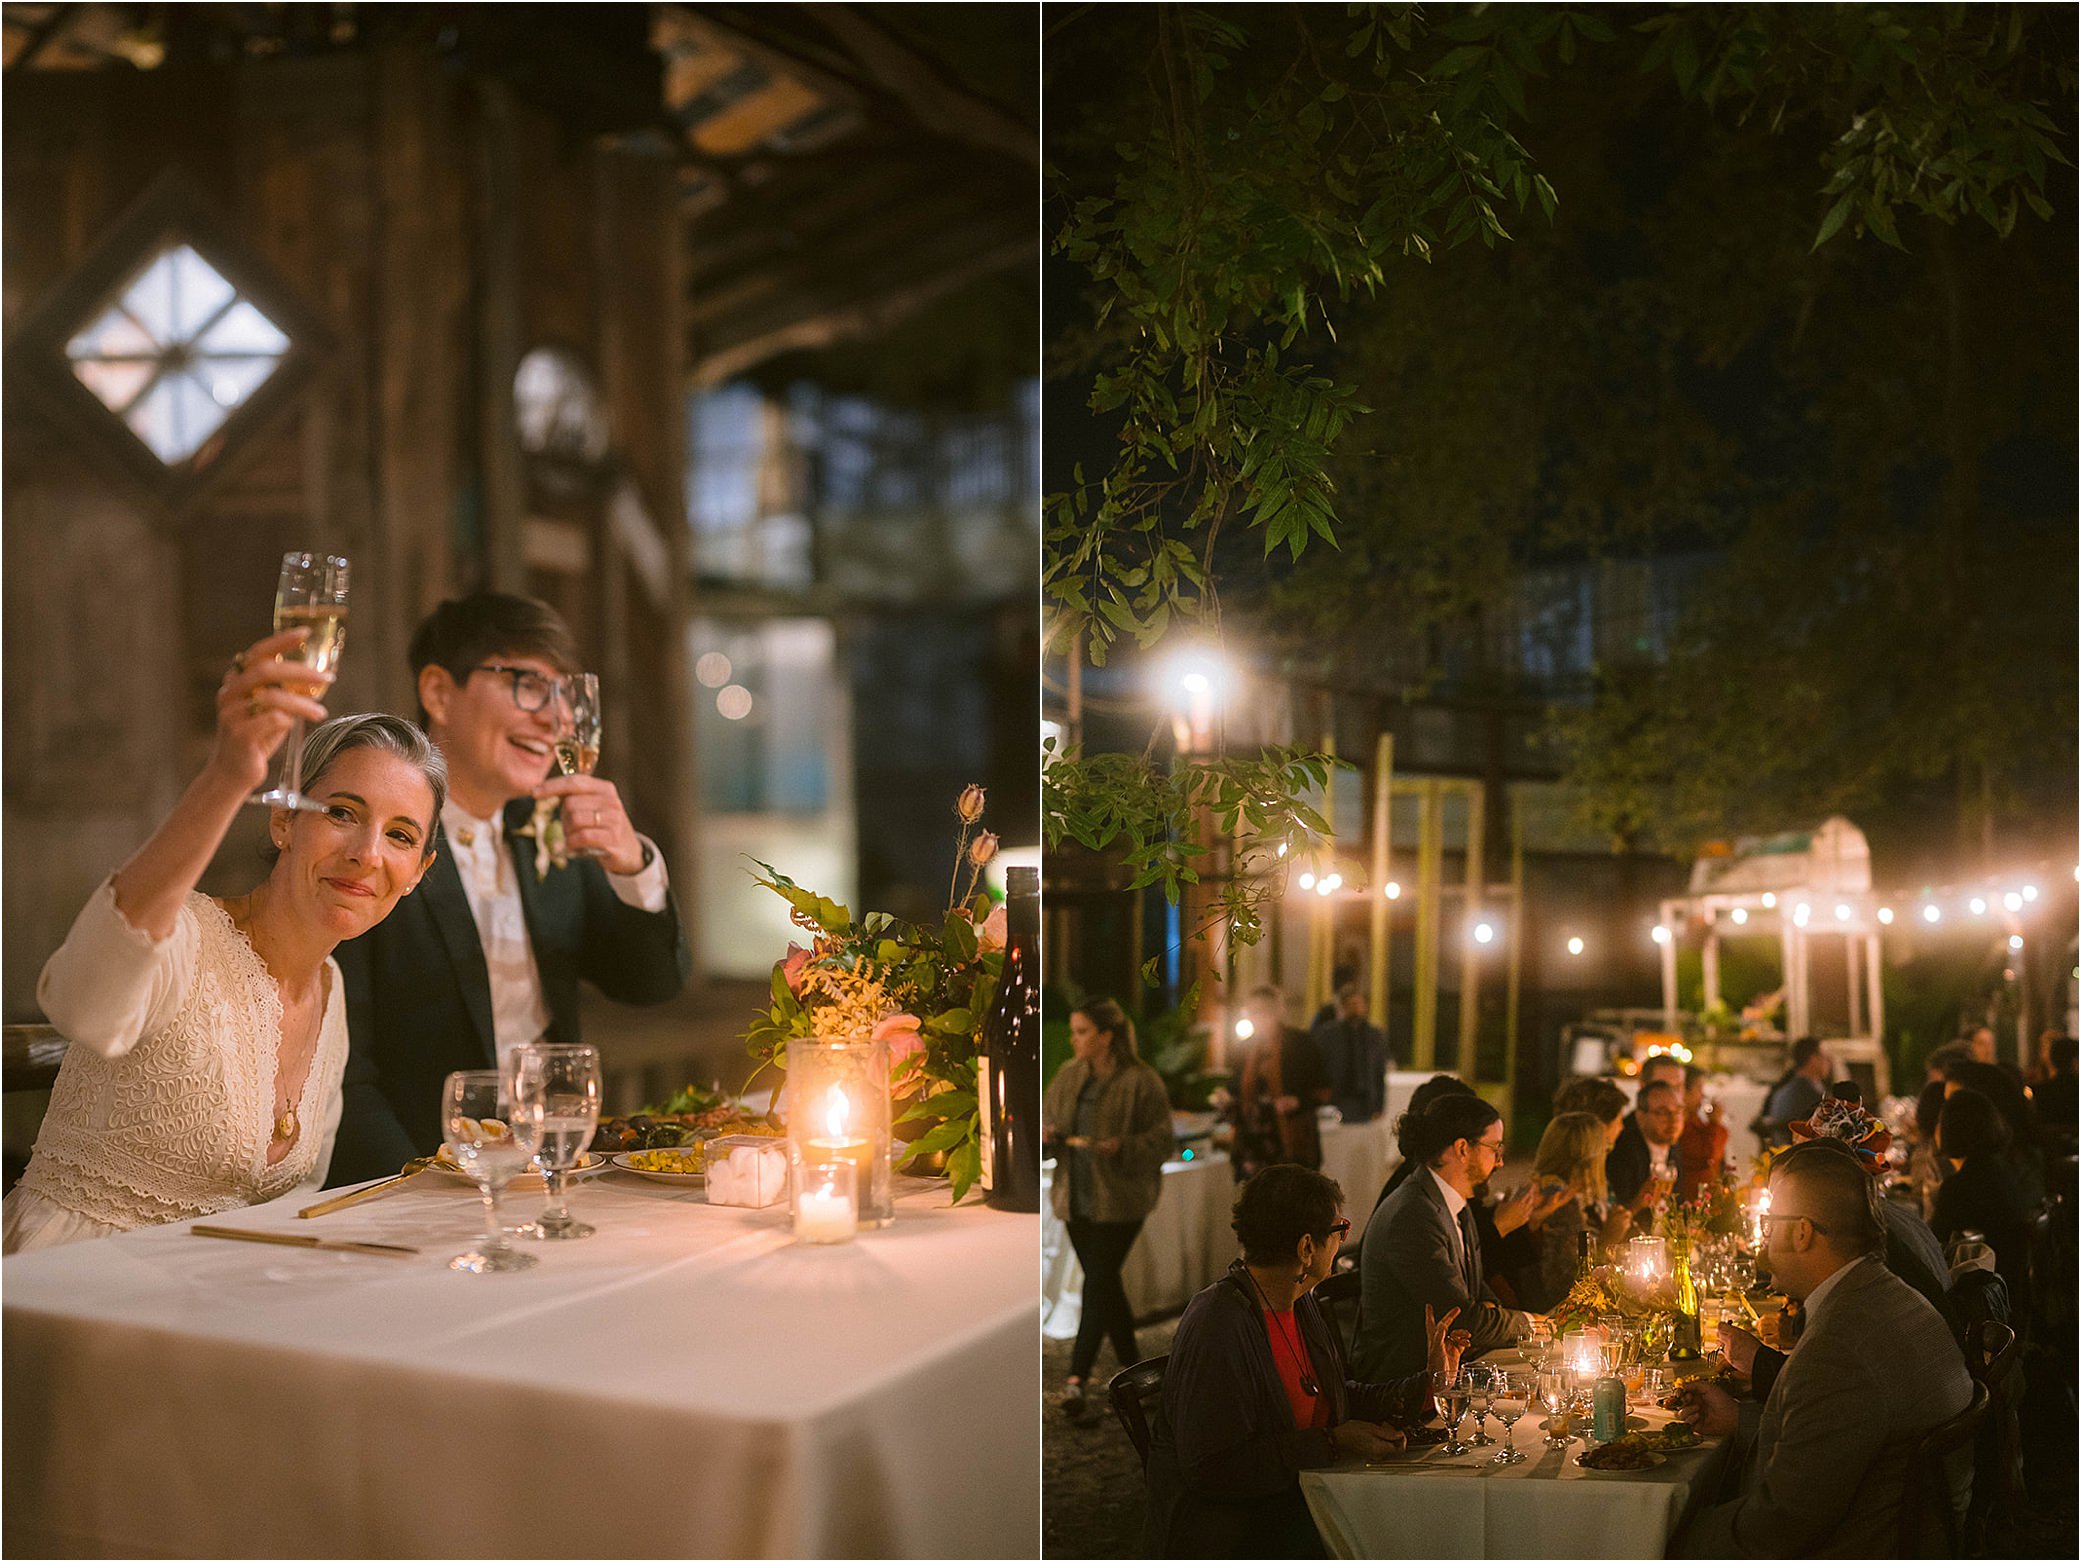 A couple raises their glasses for a toast at their candlelit wedding reception outdoors.